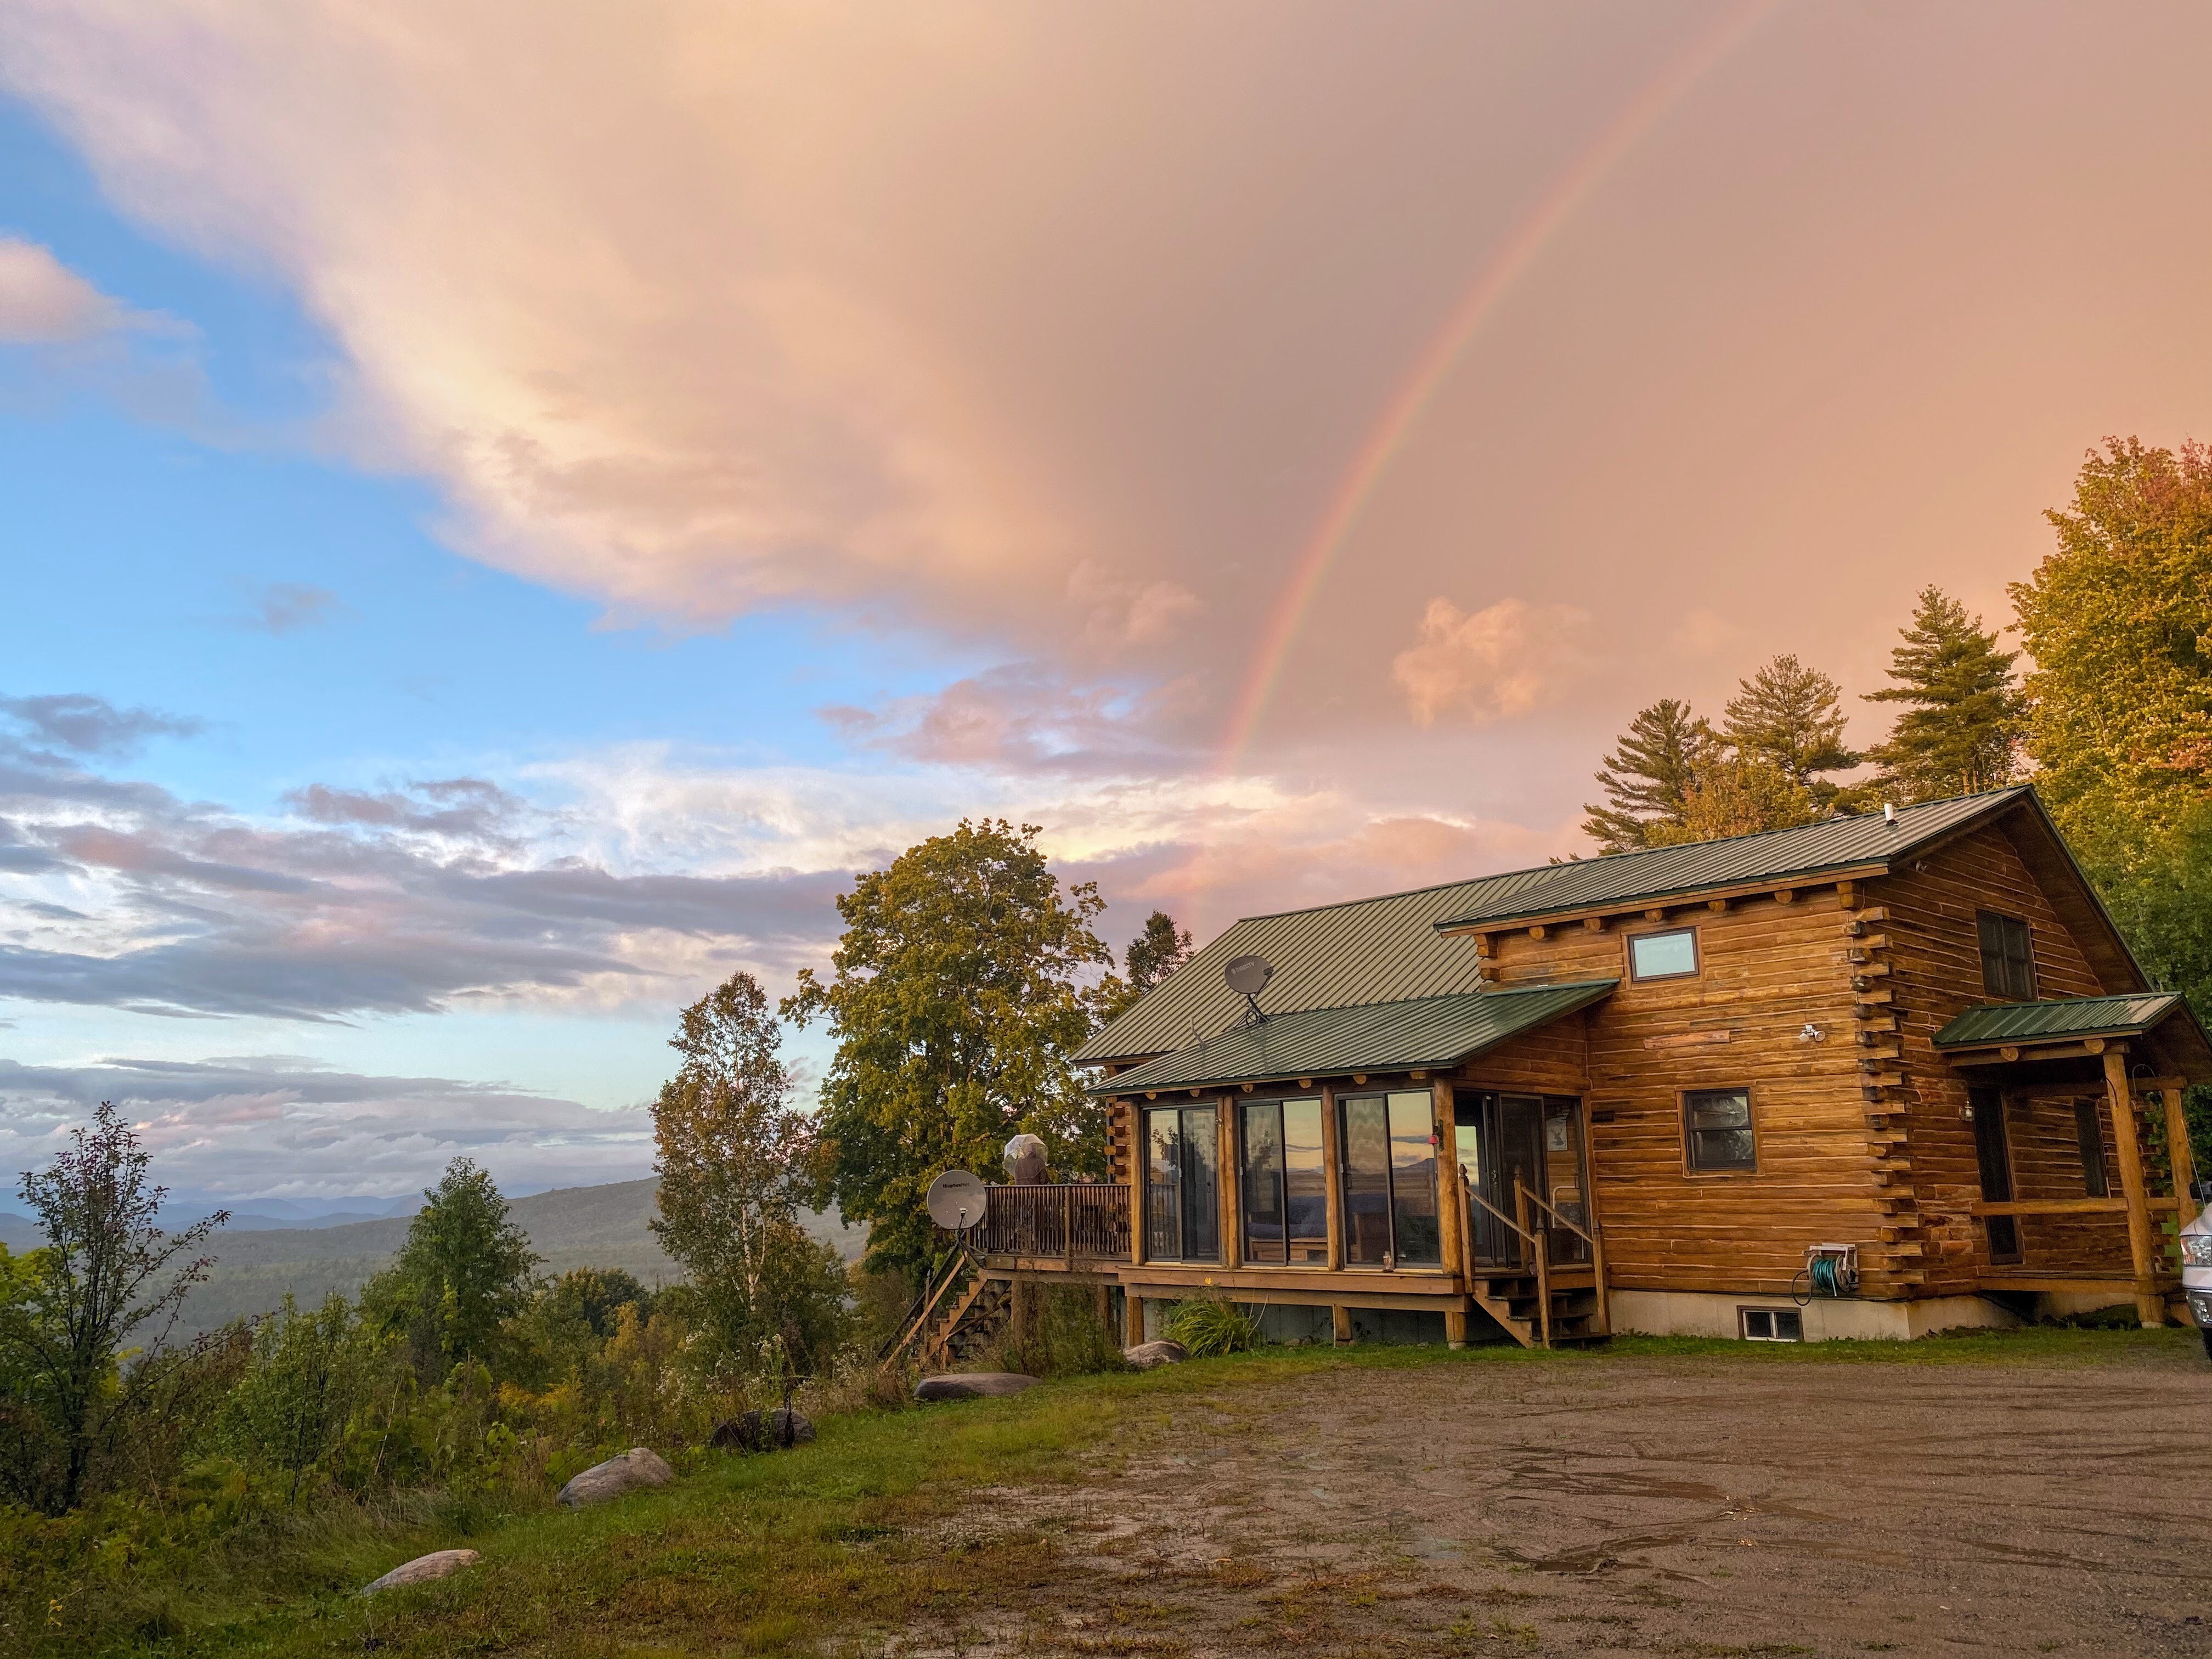 Nestled on a mountainside overlooking Vermont's Northeast Kingdom and the Connecticut River, this quintessential log home combines the charm of traditional log houses with modern comforts and amenities, including granite countertops and stainless steel ap